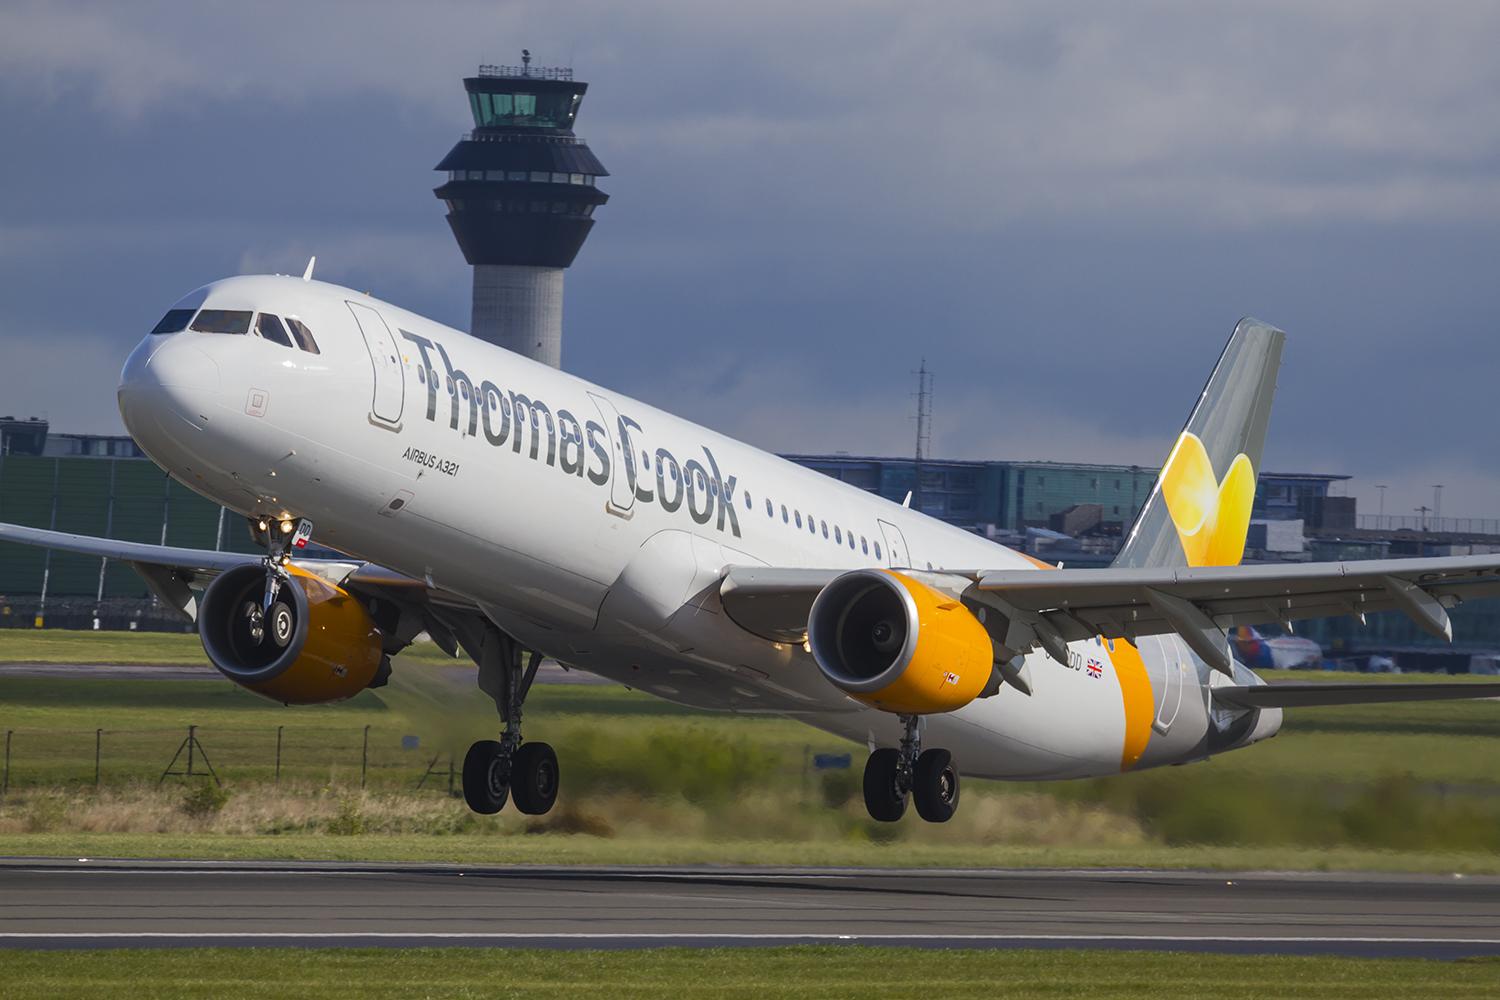 Thomas Cook Airlines was ranked the worst carrier